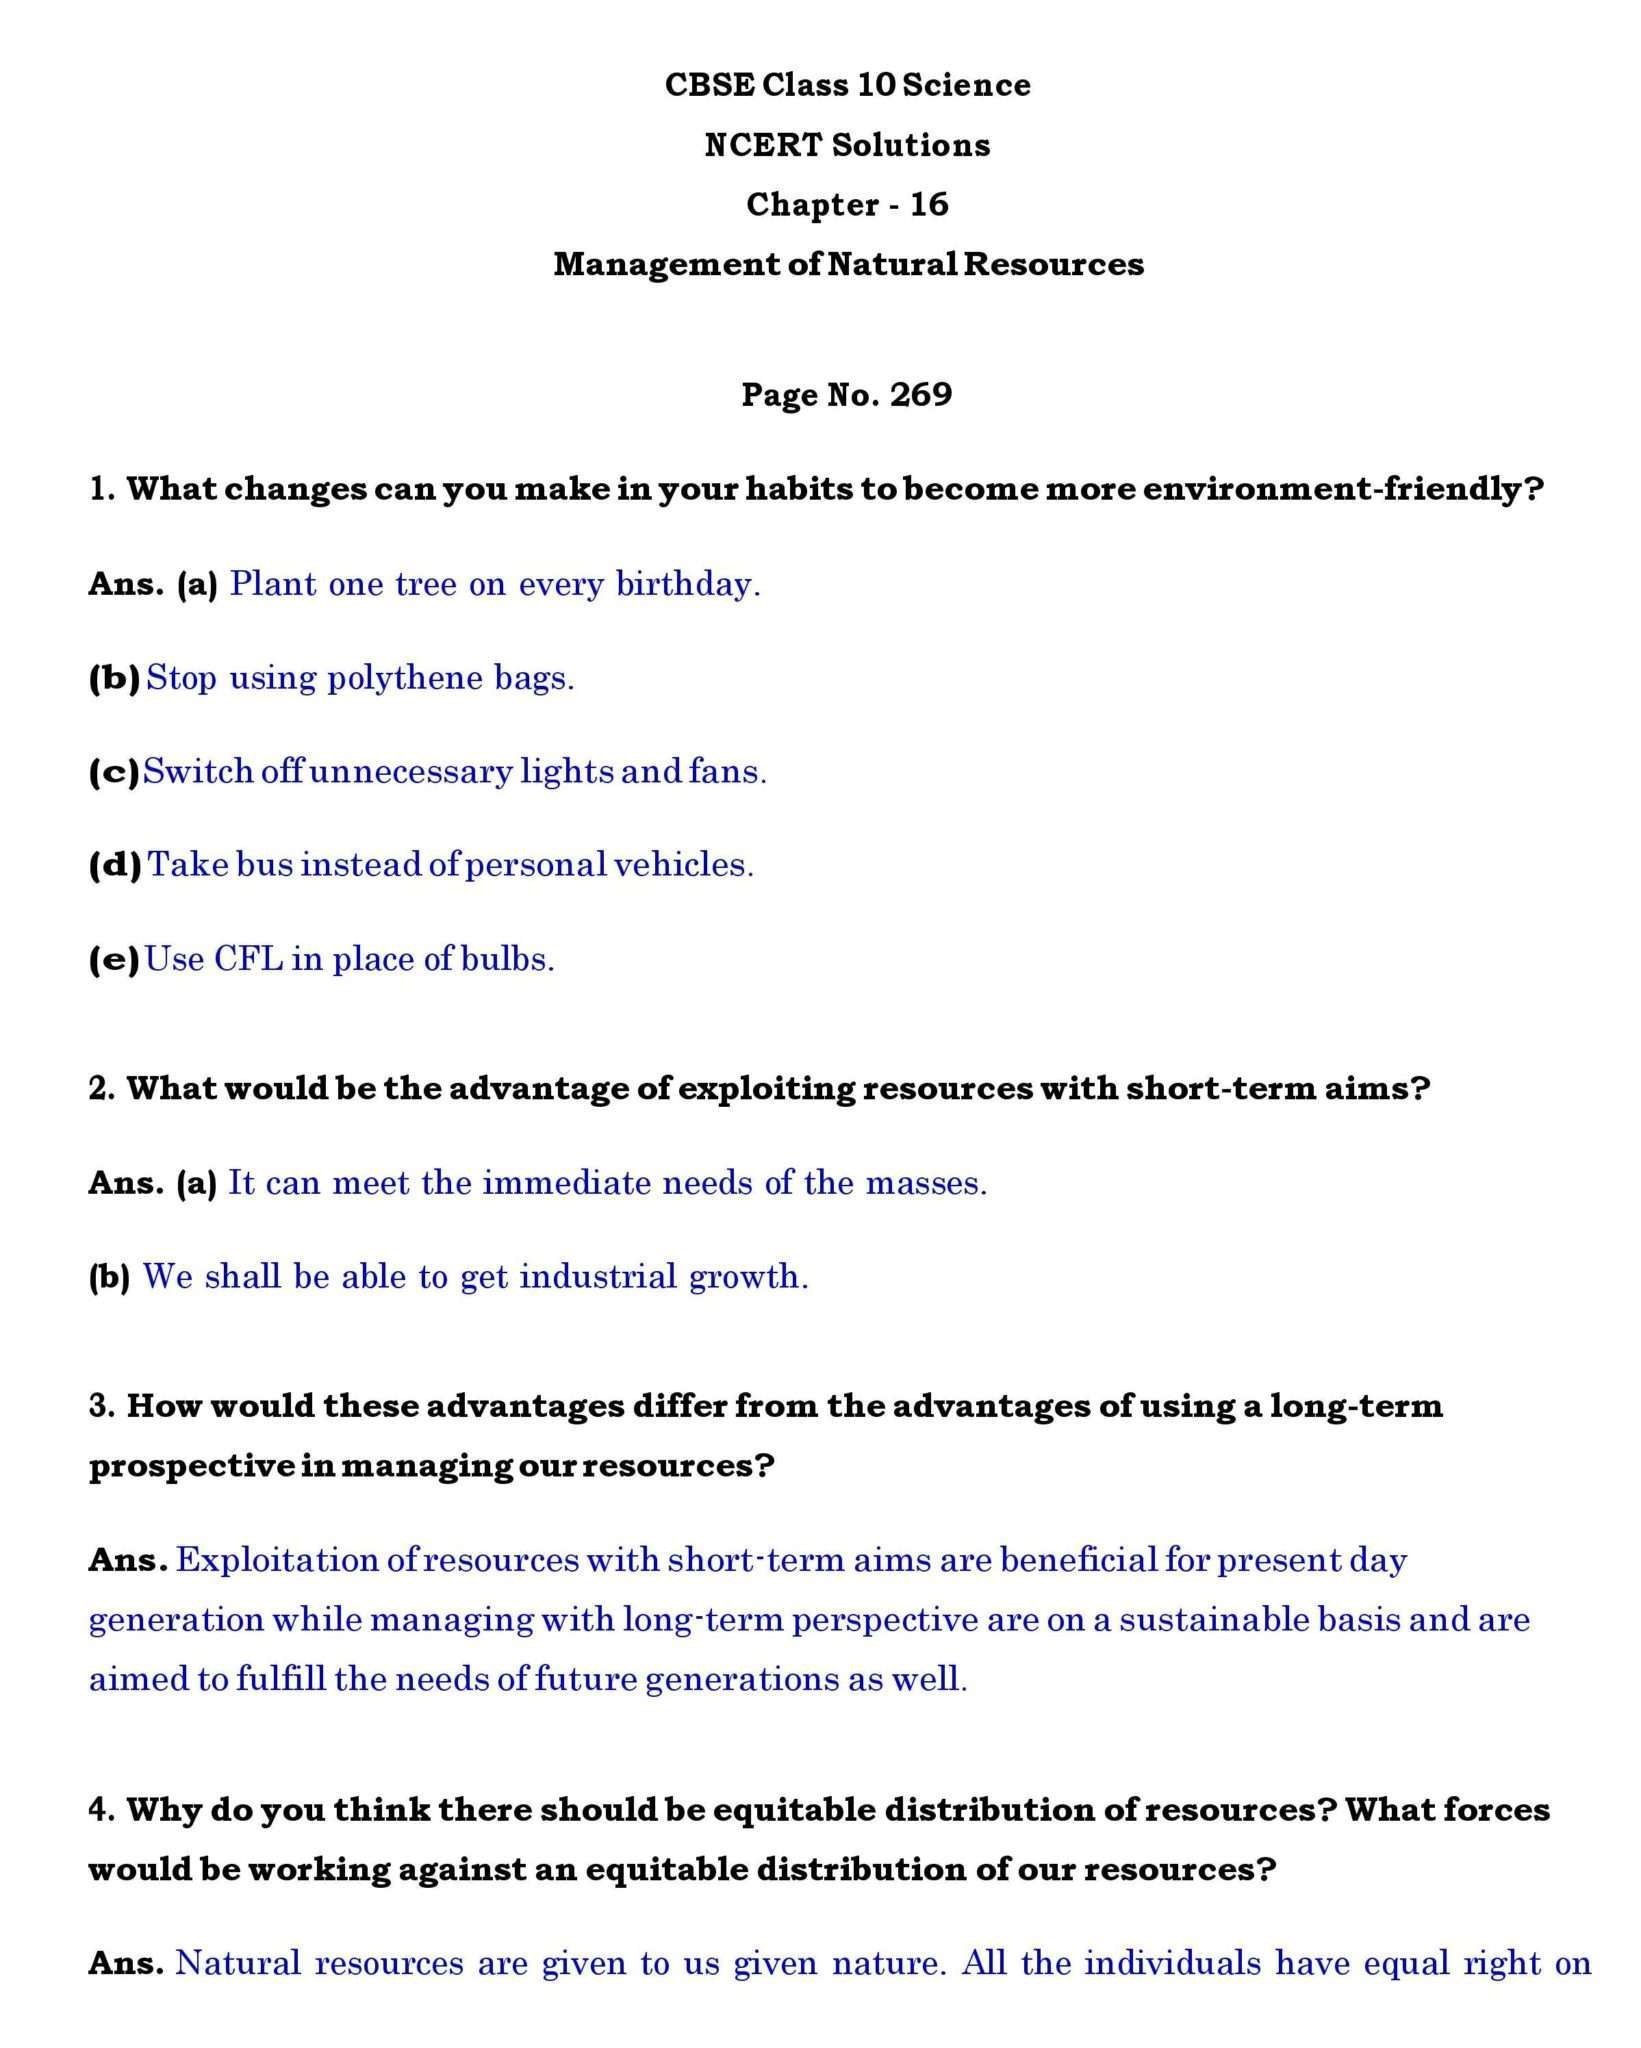 Ch 16 Science Management of Natural Resources page 001